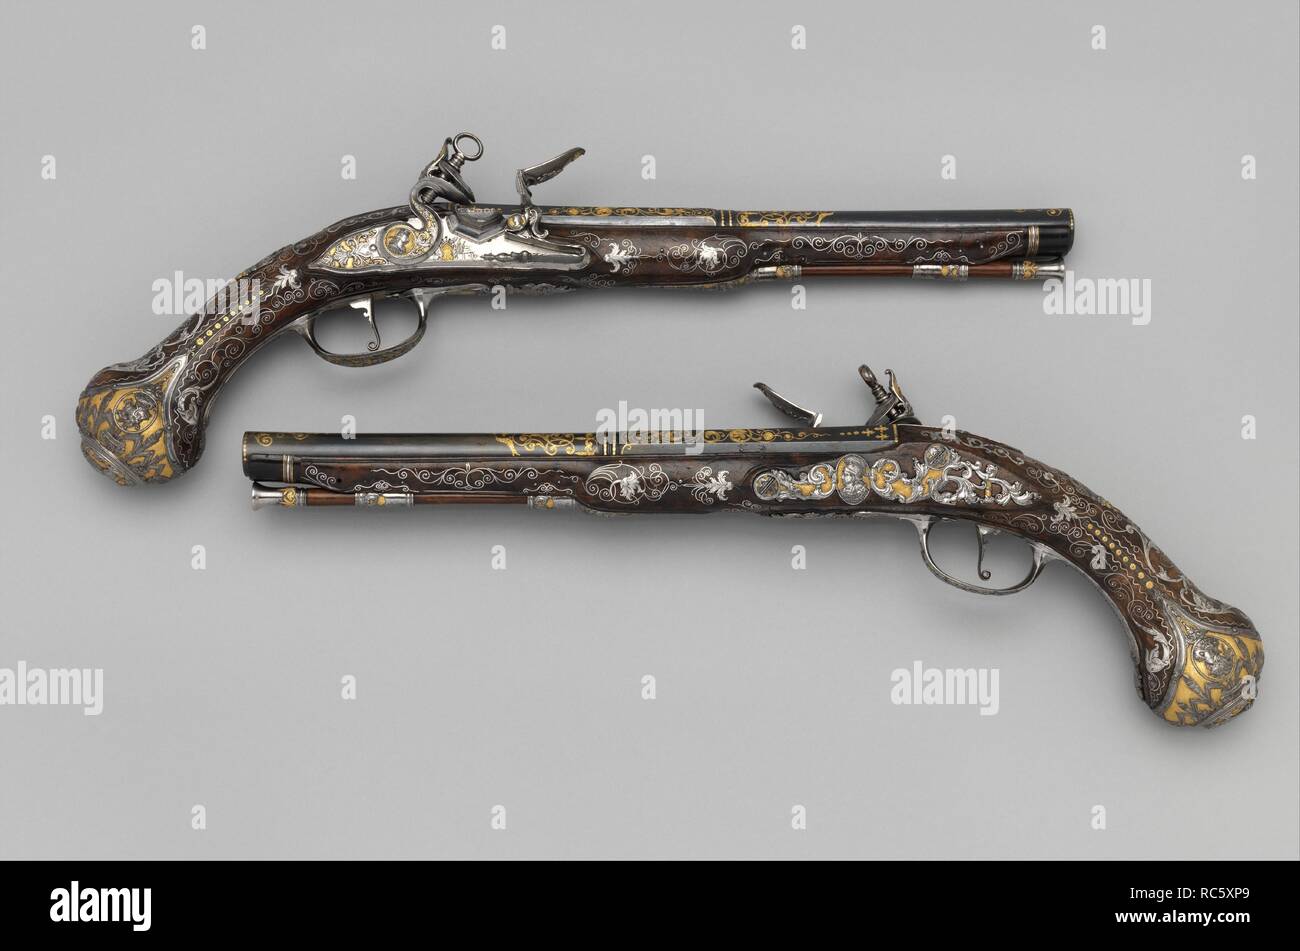 Pair of Flintlock Pistols Made for Ferdinand IV, King of Naples and Sicily (1751-1825). Barrelsmith: Emanuel Esteva (Spanish, active in Naples, Italy, recorded about 1768-73). Culture: Italo-Spanish, Naples. Dimensions: L. of each 17 3/8 in. (44.1 cm); L. of each barrel 11 1/16 in. (28.1 cm); Cal. .63 in. (16.0 mm); Wt. of each 2 lb. 4 oz. (1021 g). Gunsmith: Michele Battista (Spanish, active in Naples, Italy, recorded about 1760-90). Manufacturer: Royal Arms Manufactory at Torre Annunziata (Italian, Naples, established 1757). Date: ca. 1768.  The Royal Arms Factory in Naples was established i Stock Photo